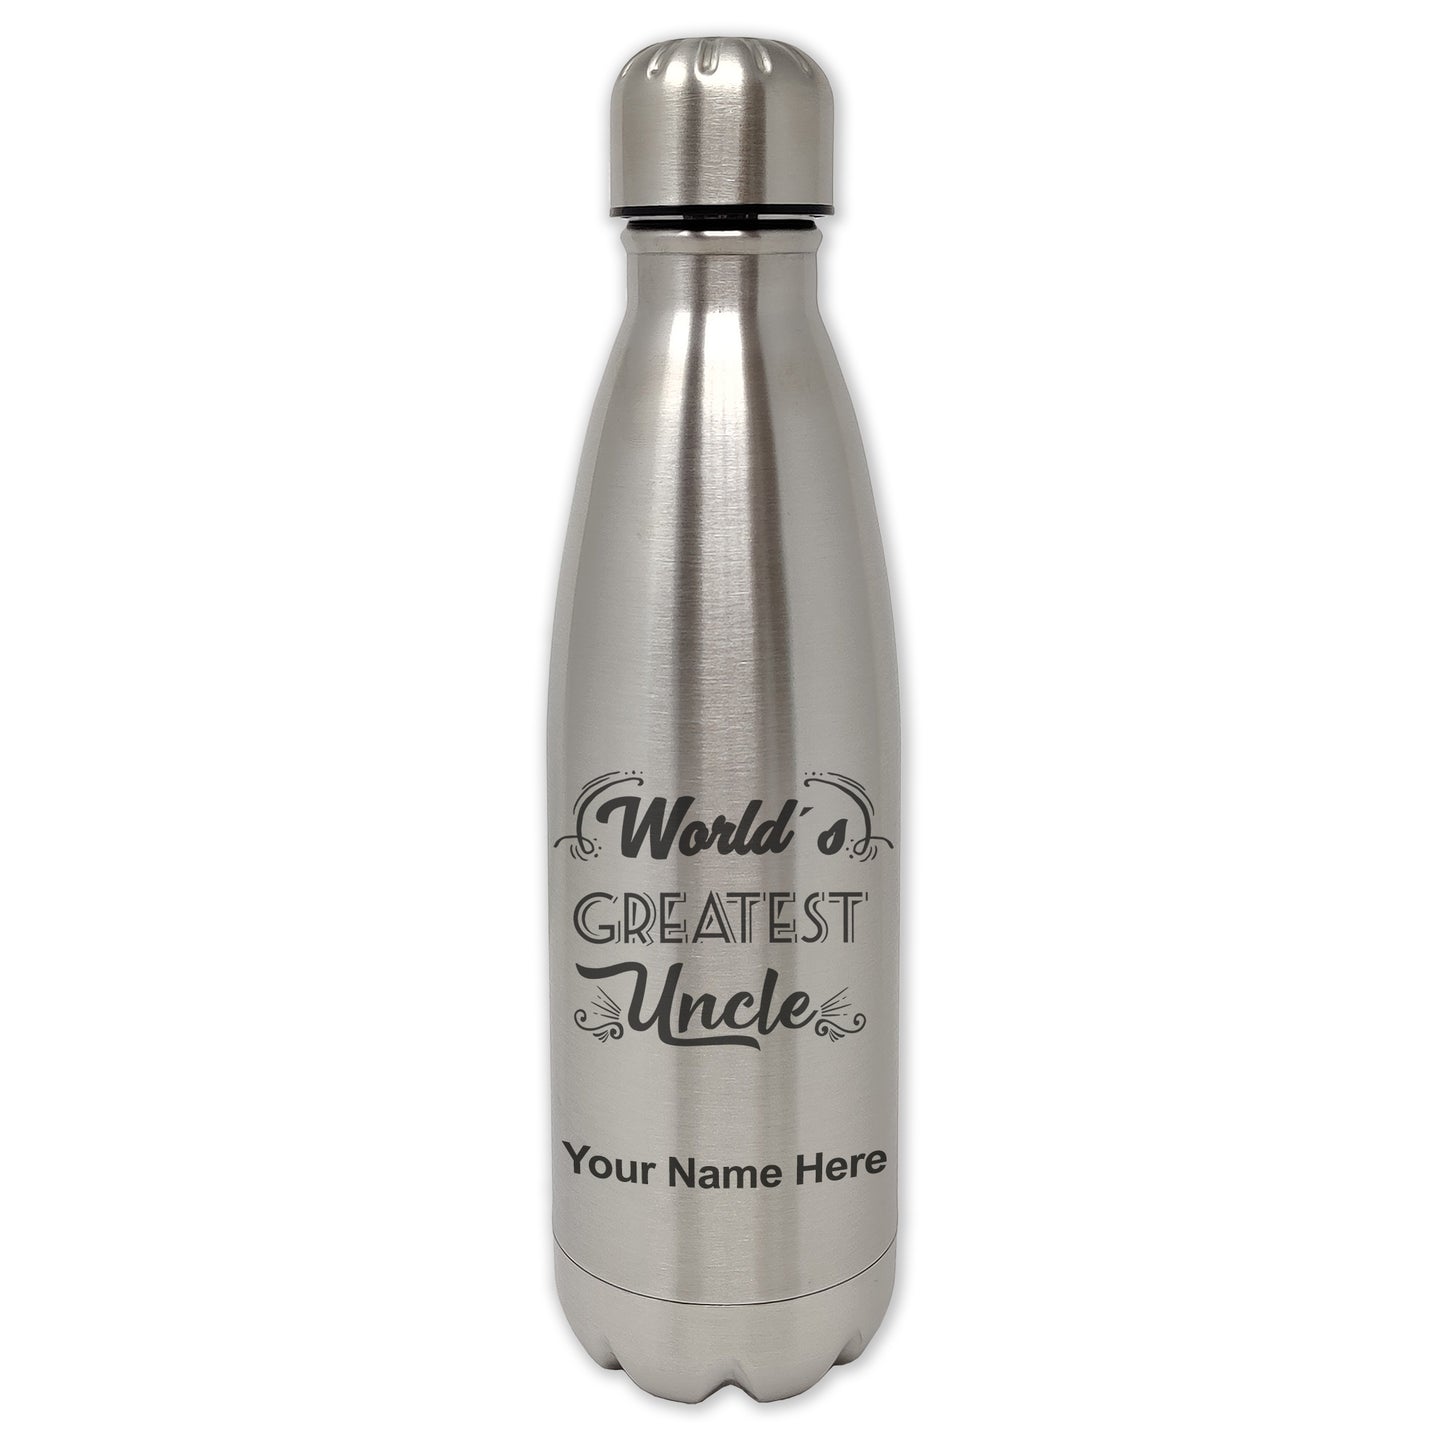 LaserGram Single Wall Water Bottle, World's Greatest Uncle, Personalized Engraving Included